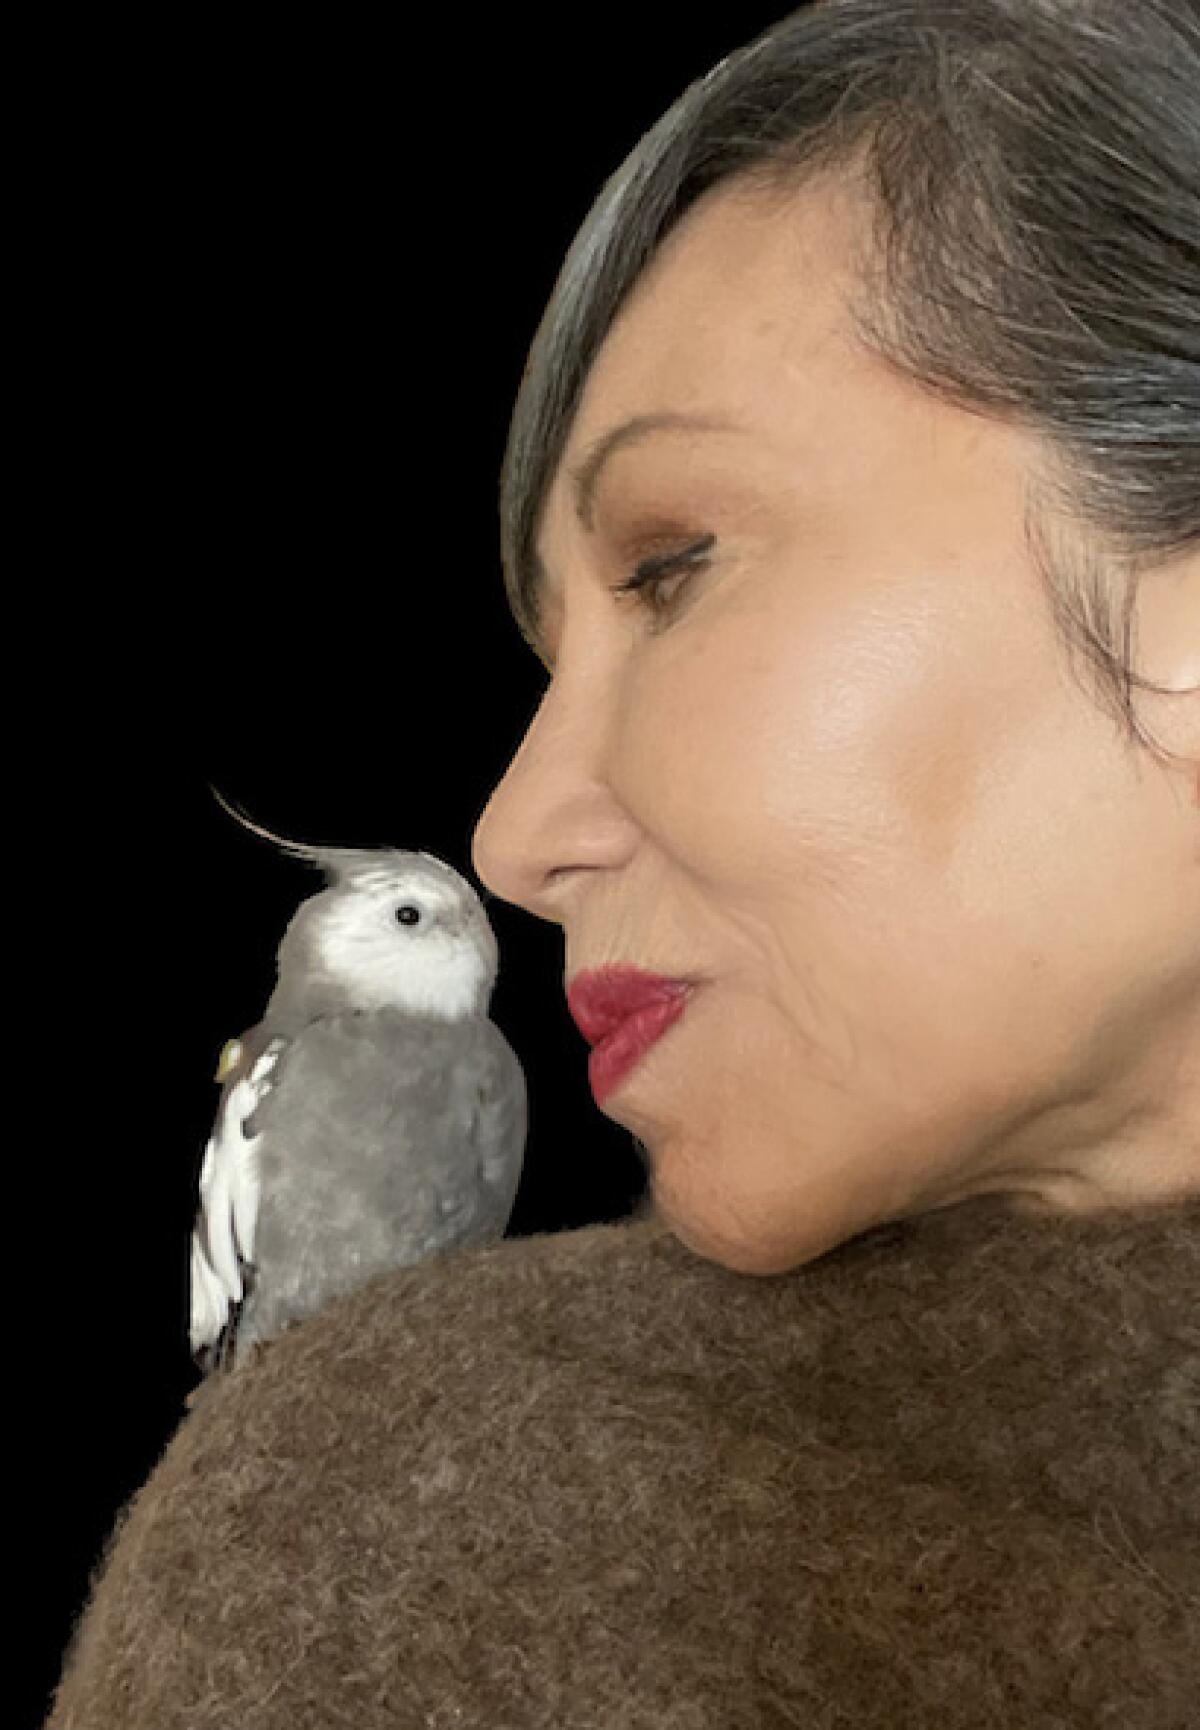 Author Amy Tan, picture here with a feathered friend.